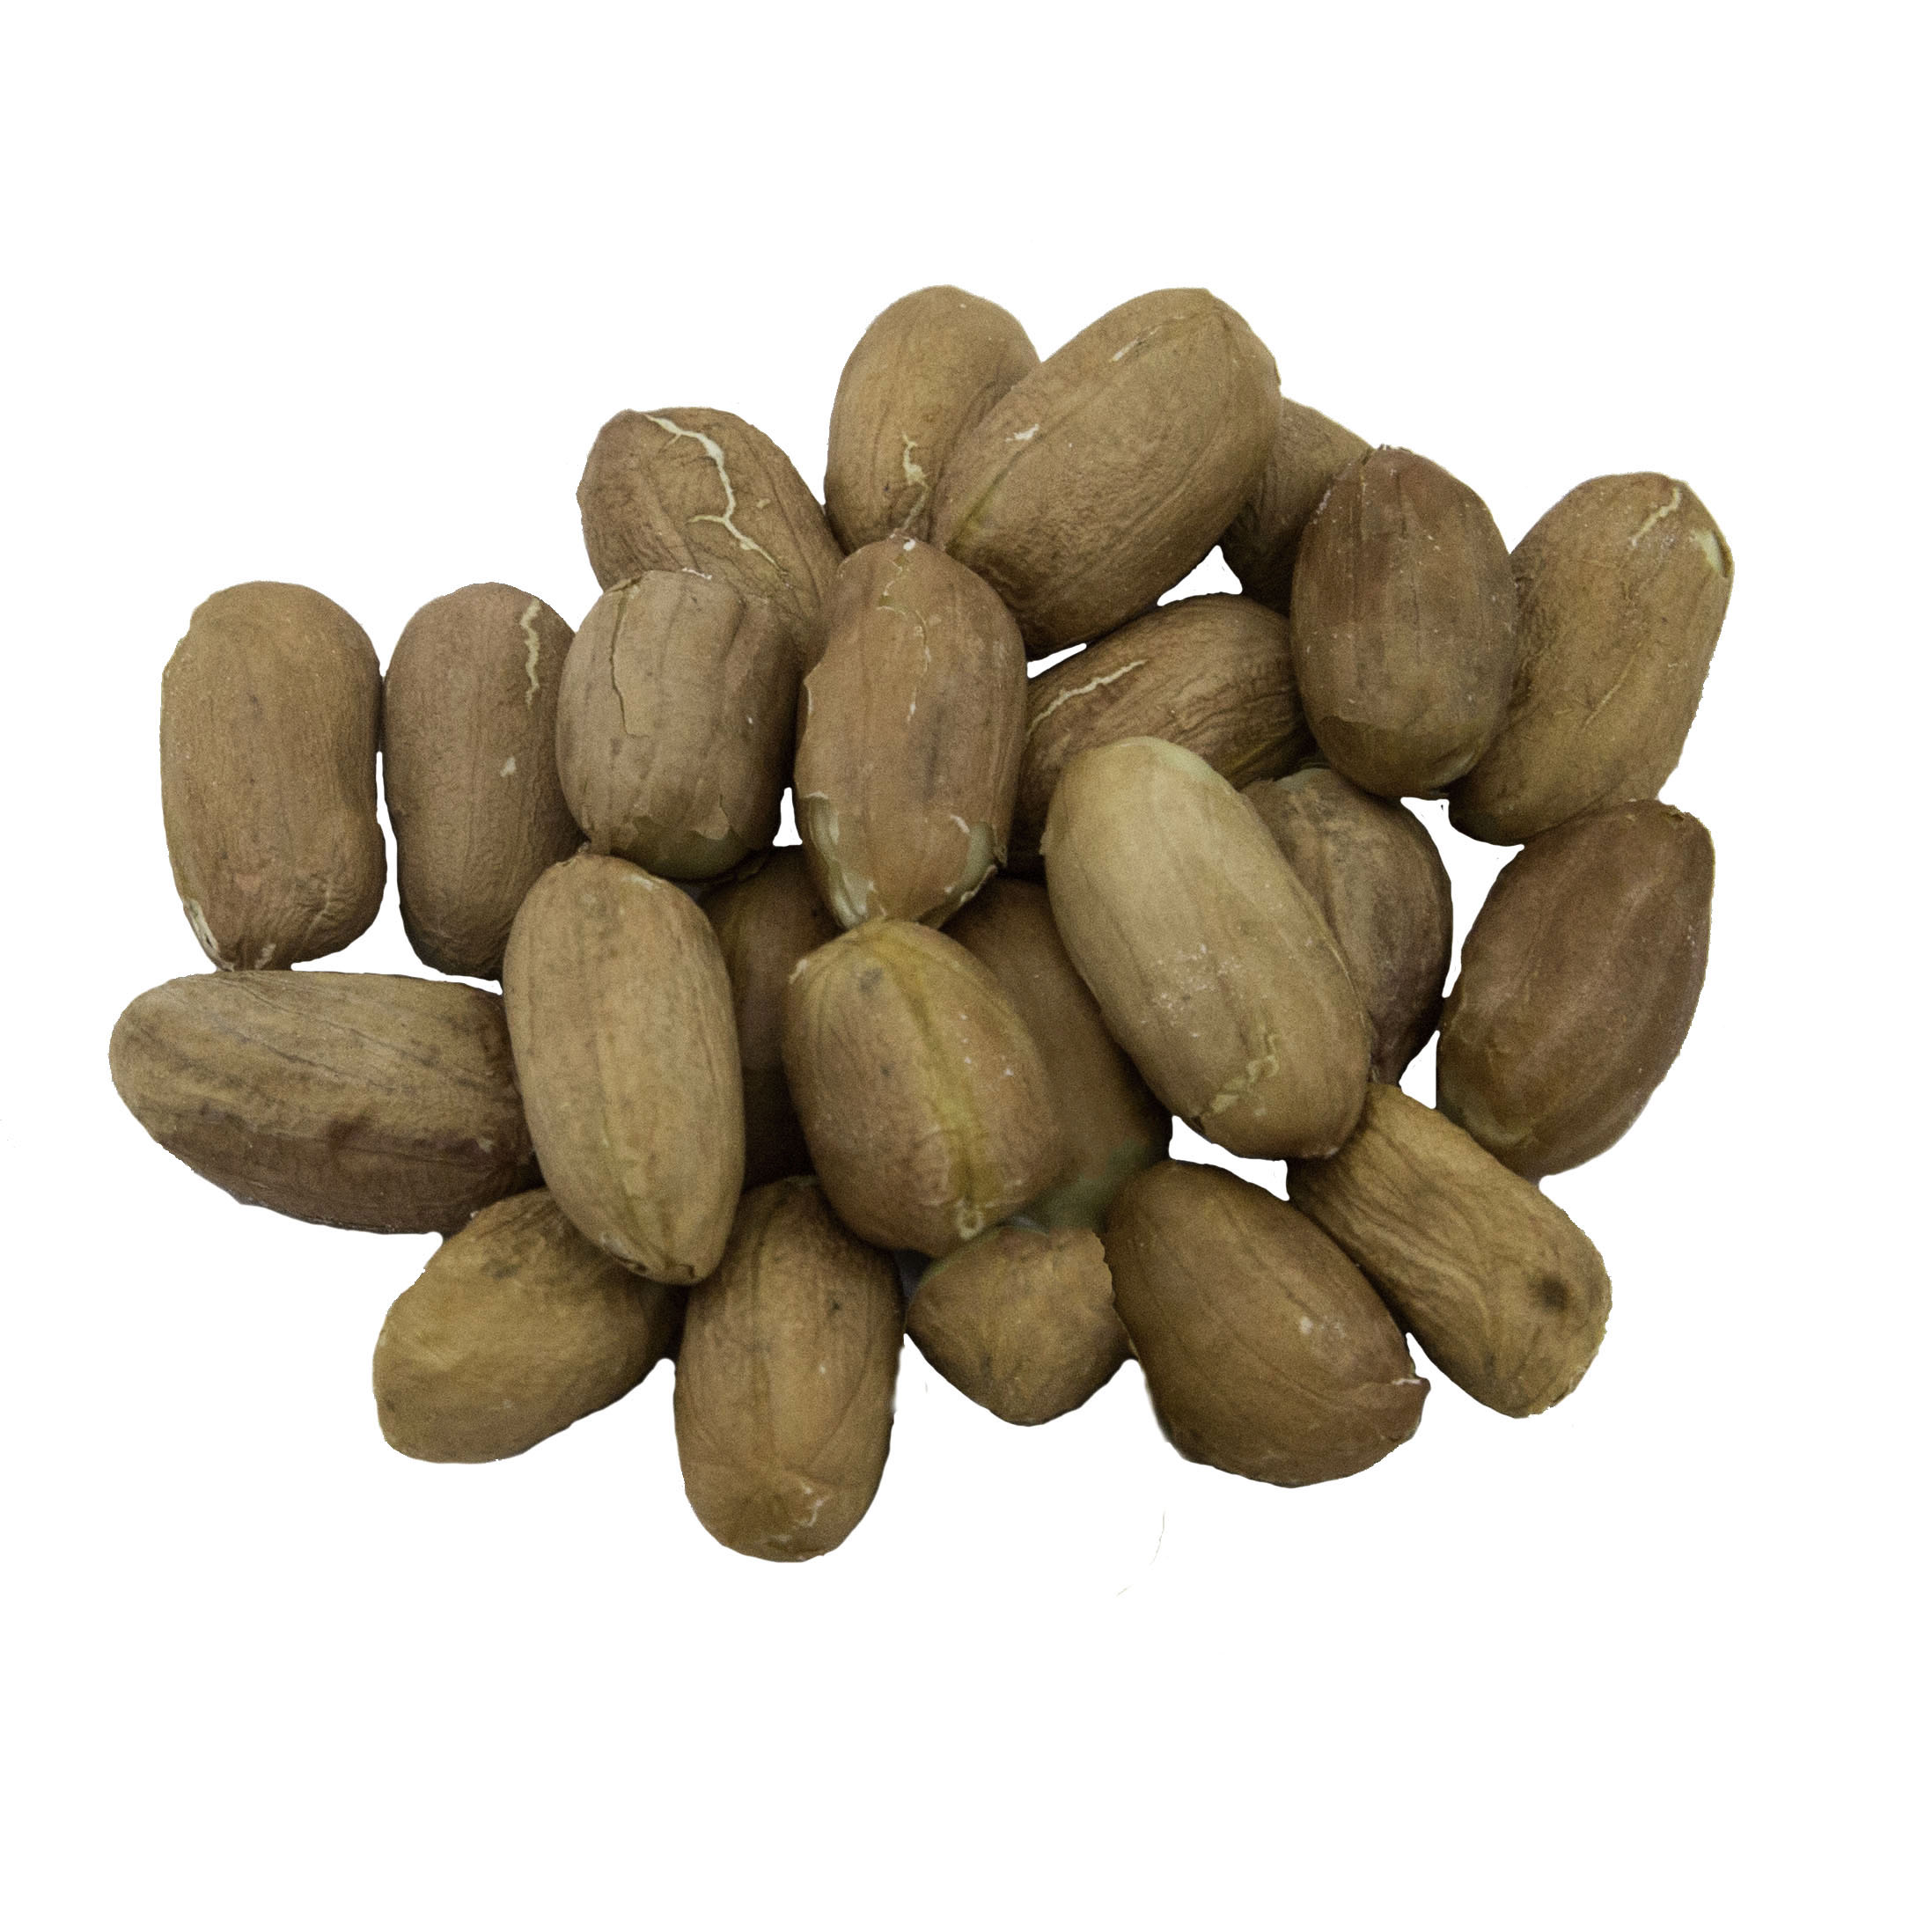 Organic Unblanched Peanuts